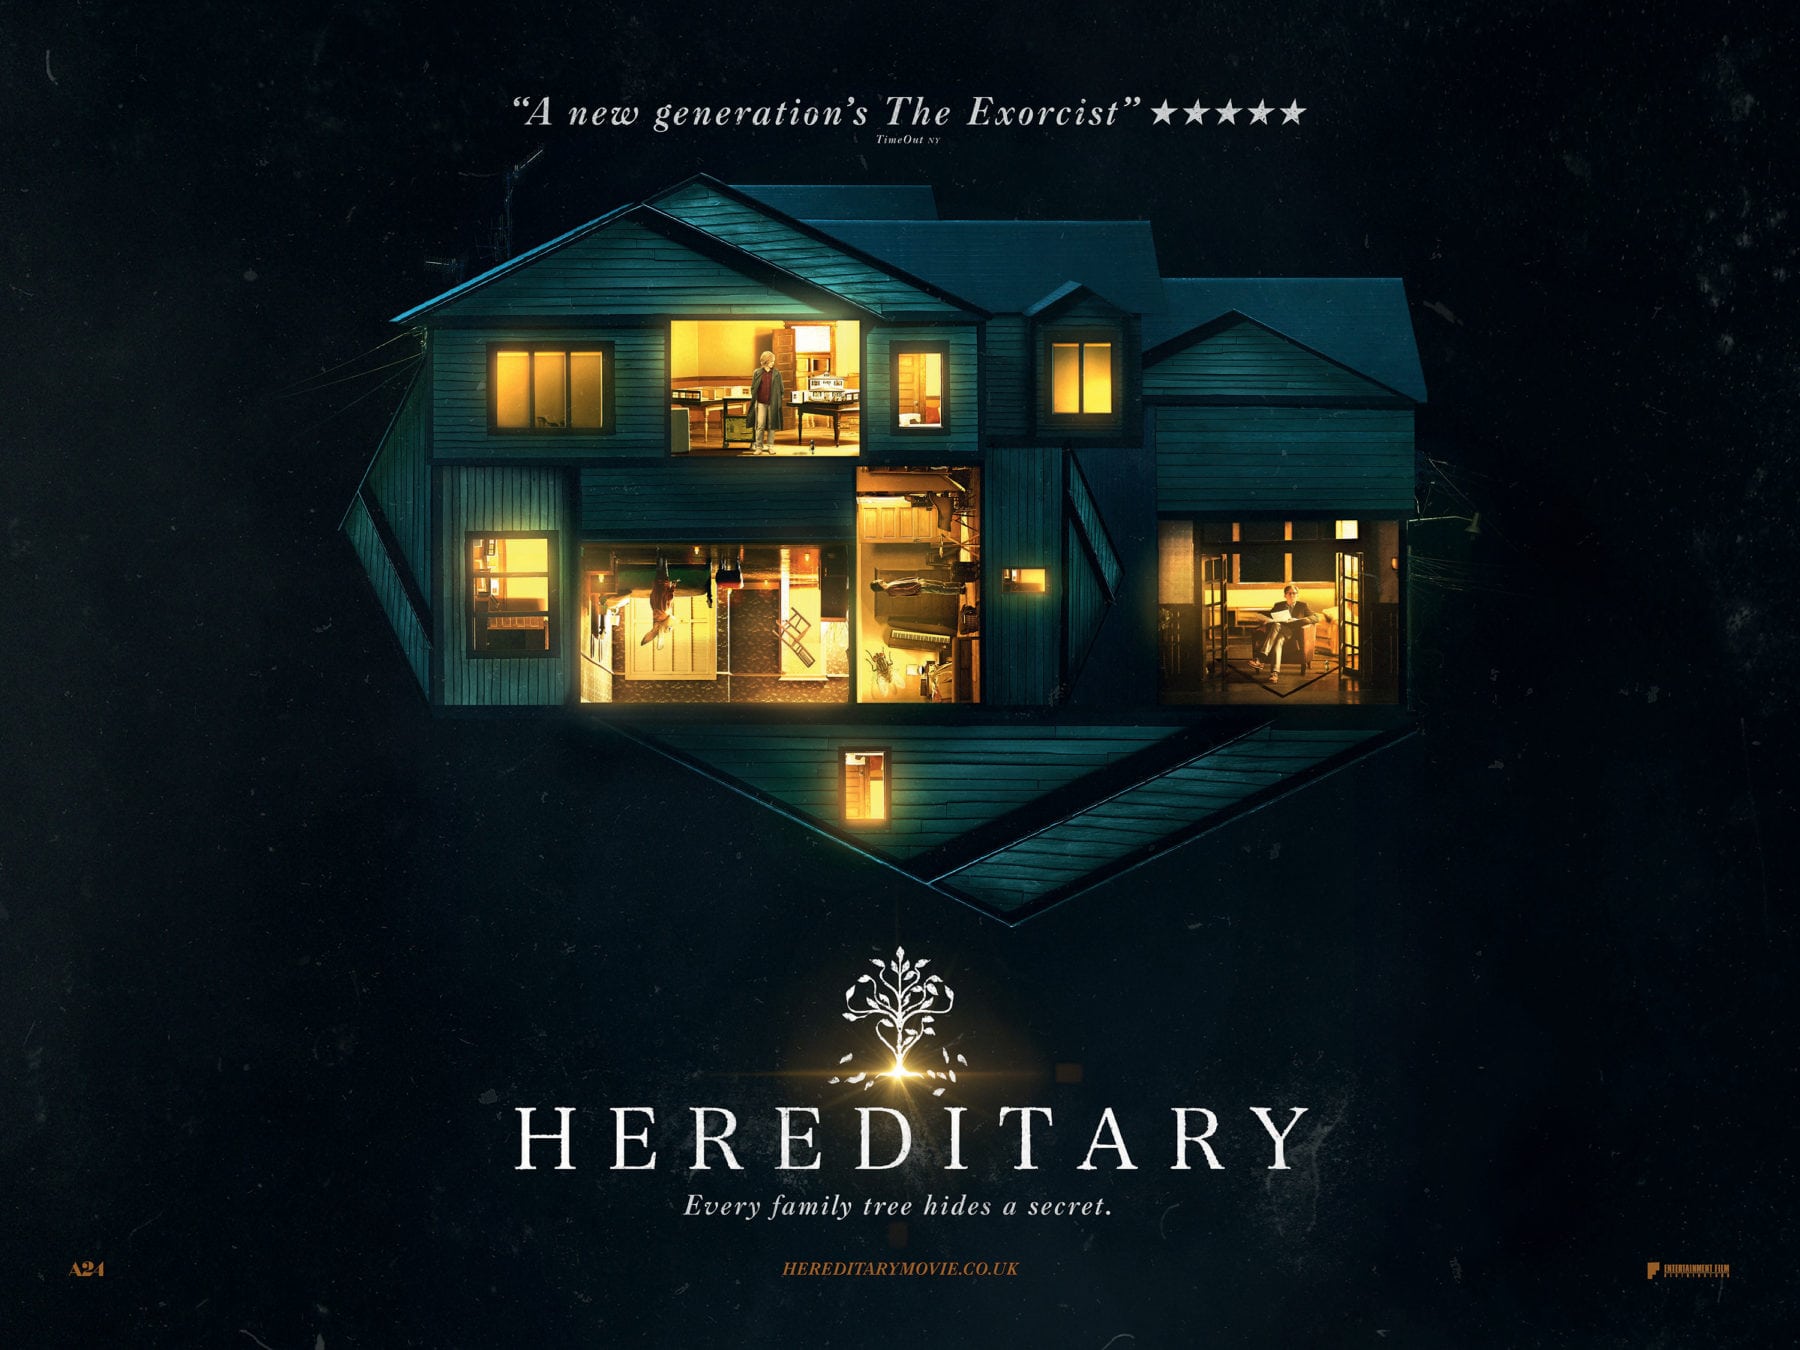 Giveaway - Win a signed Hereditary poster - NOW CLOSED 